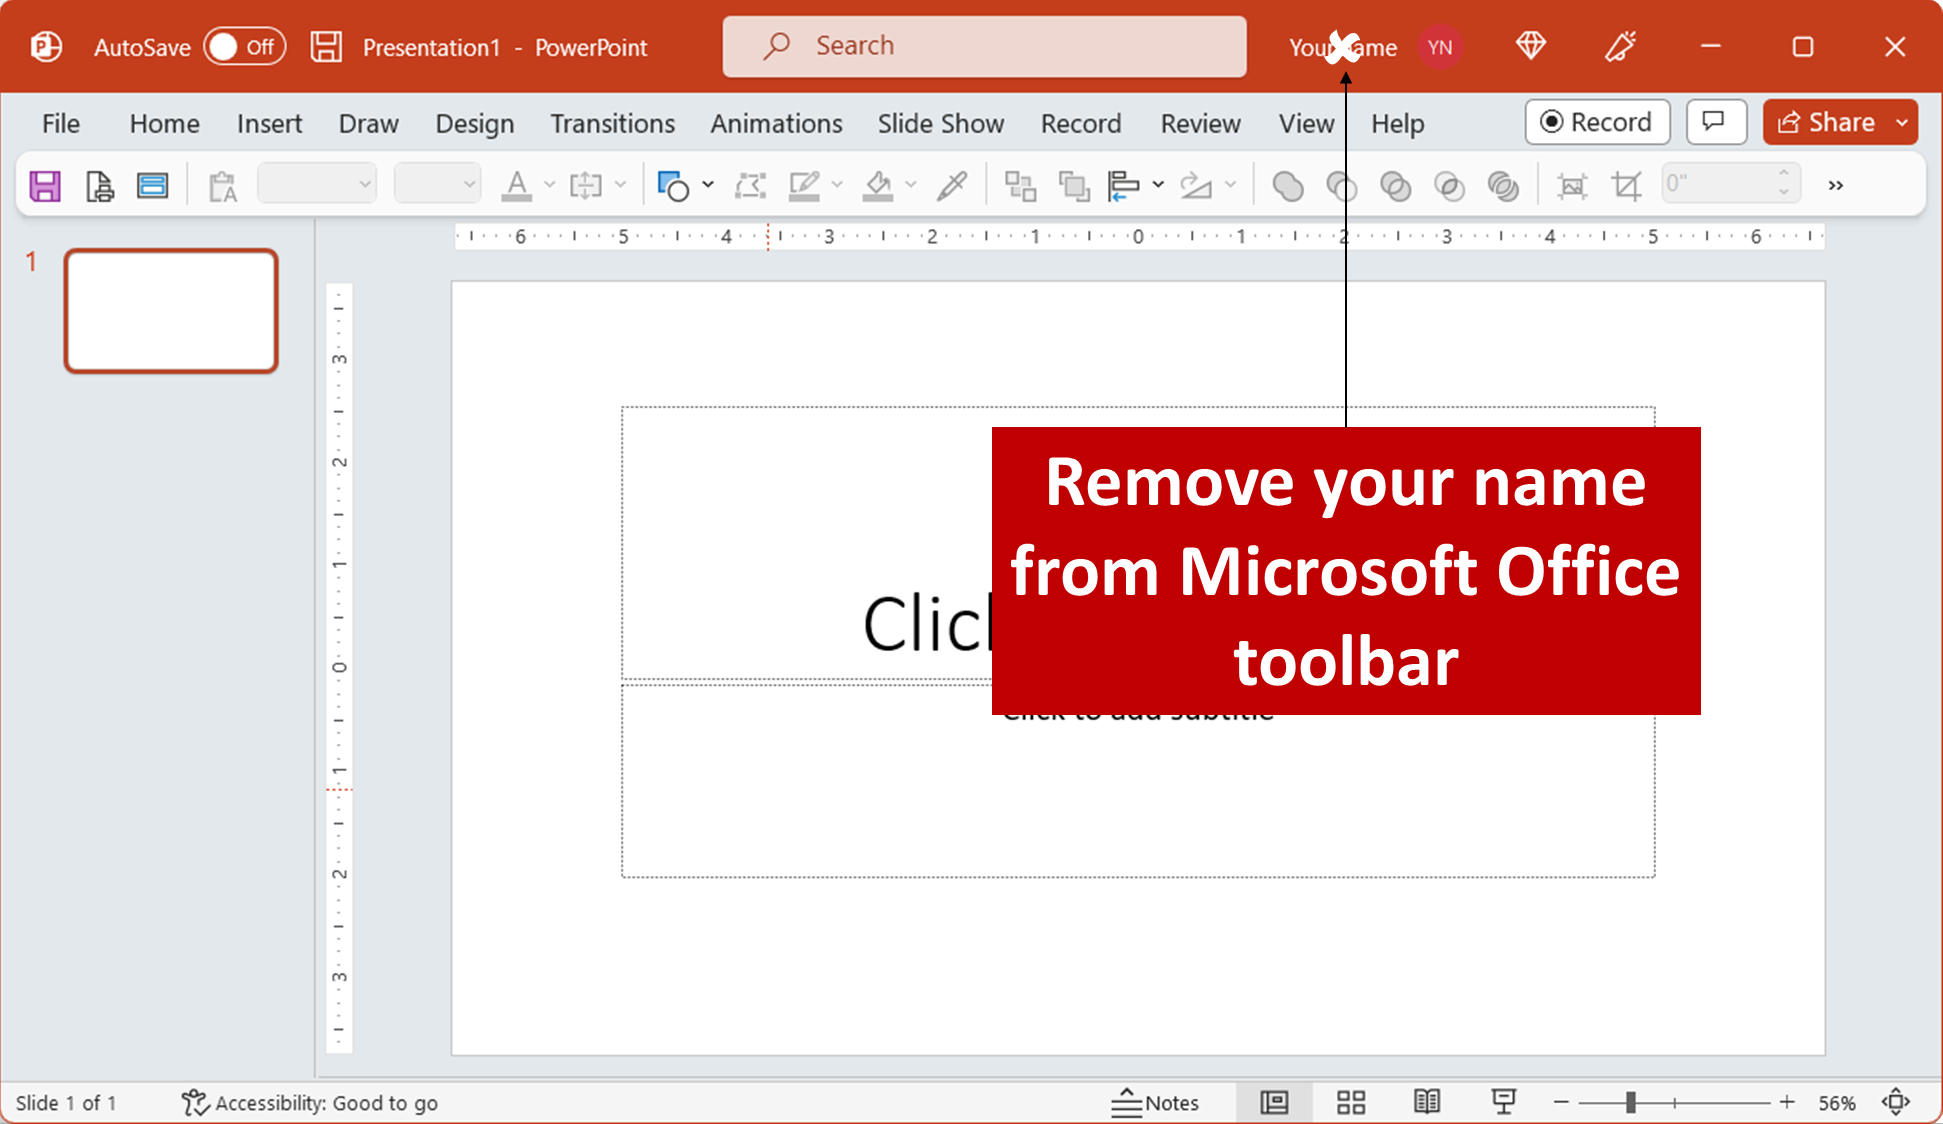 Remove your name from Microsoft Office toolbar - How to - Techronology